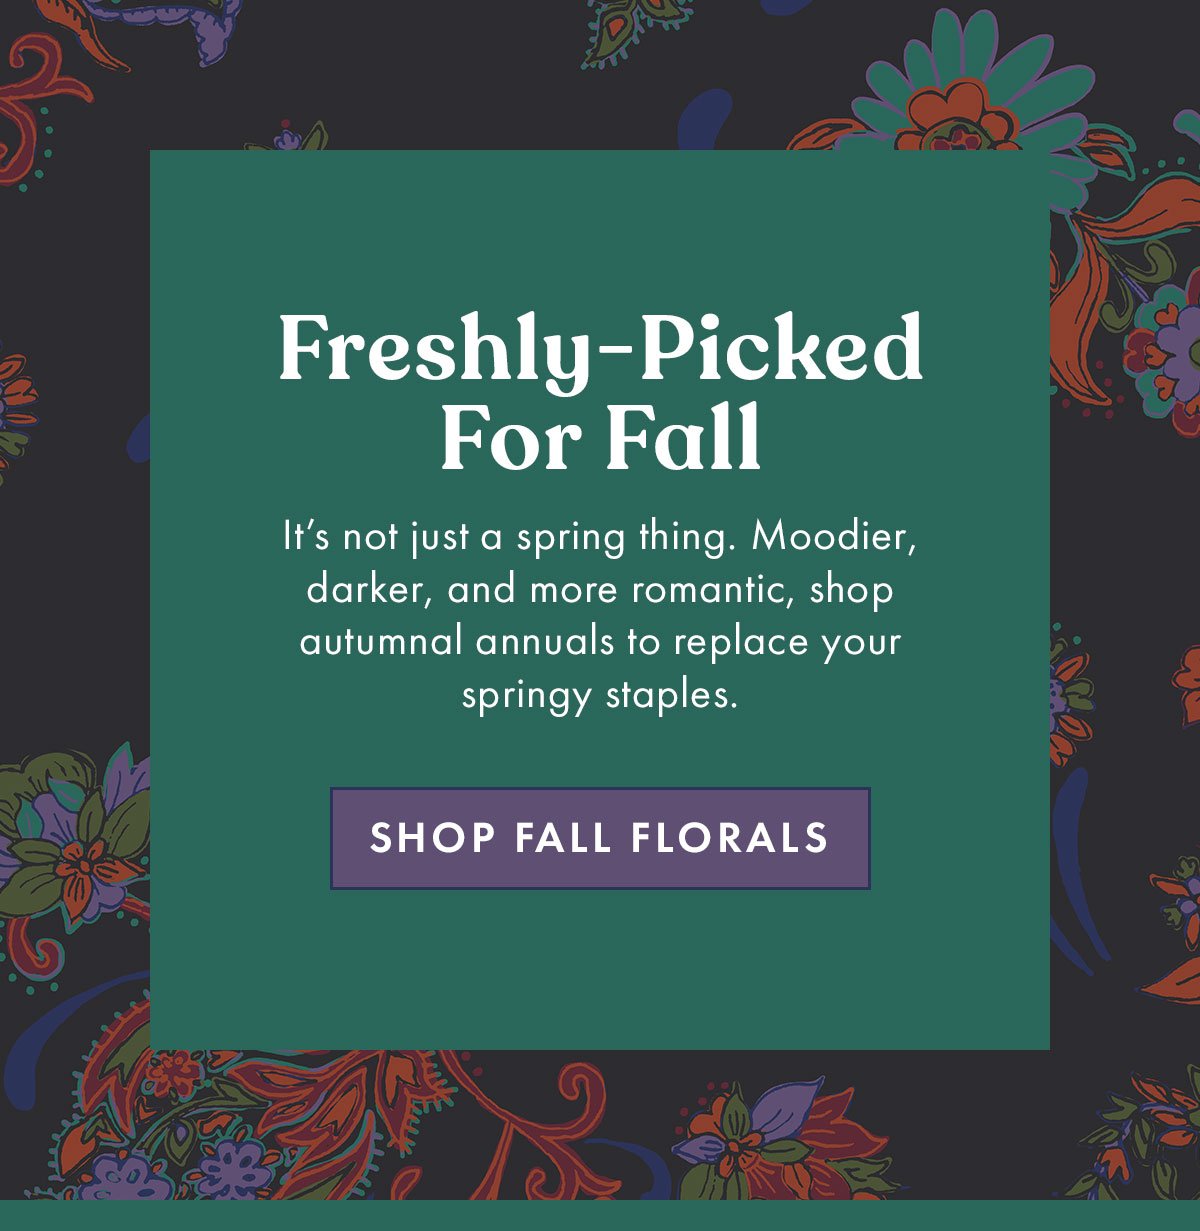 Freshly-Picked For Fall